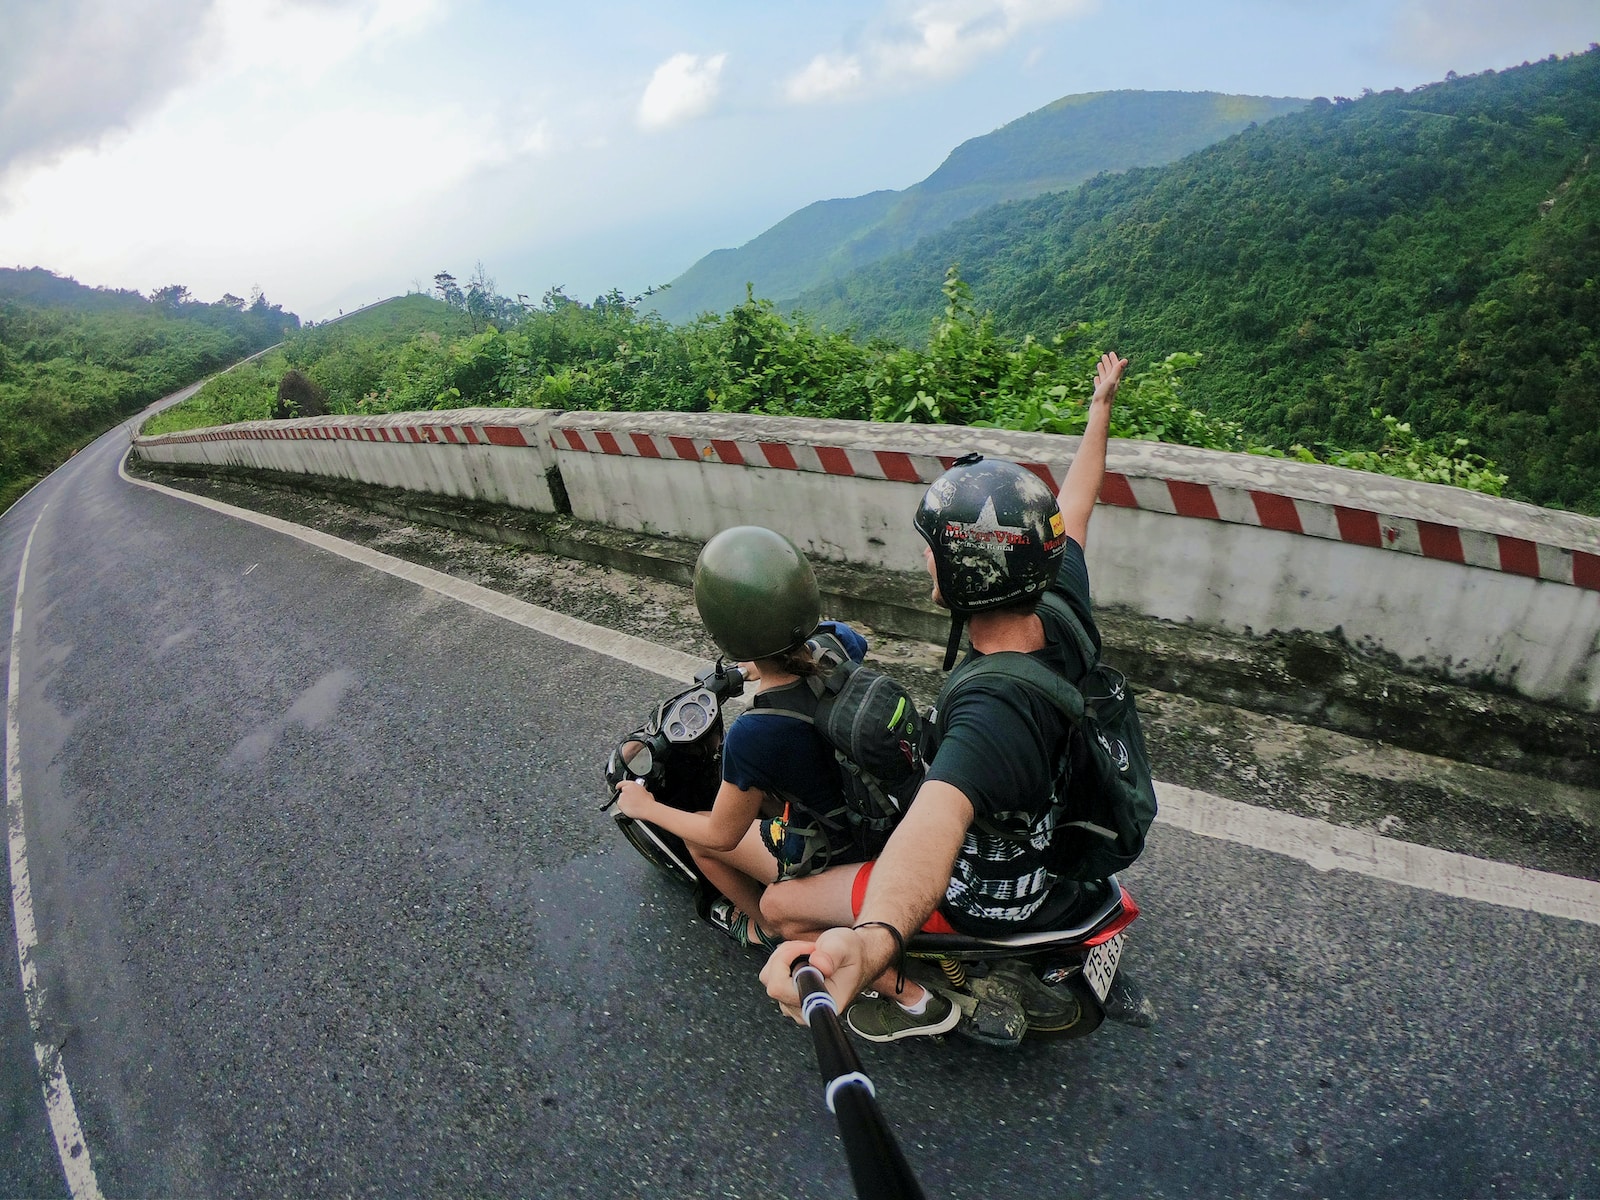 GoPro fish eye photography on woman riding motor scooter with man on bridge